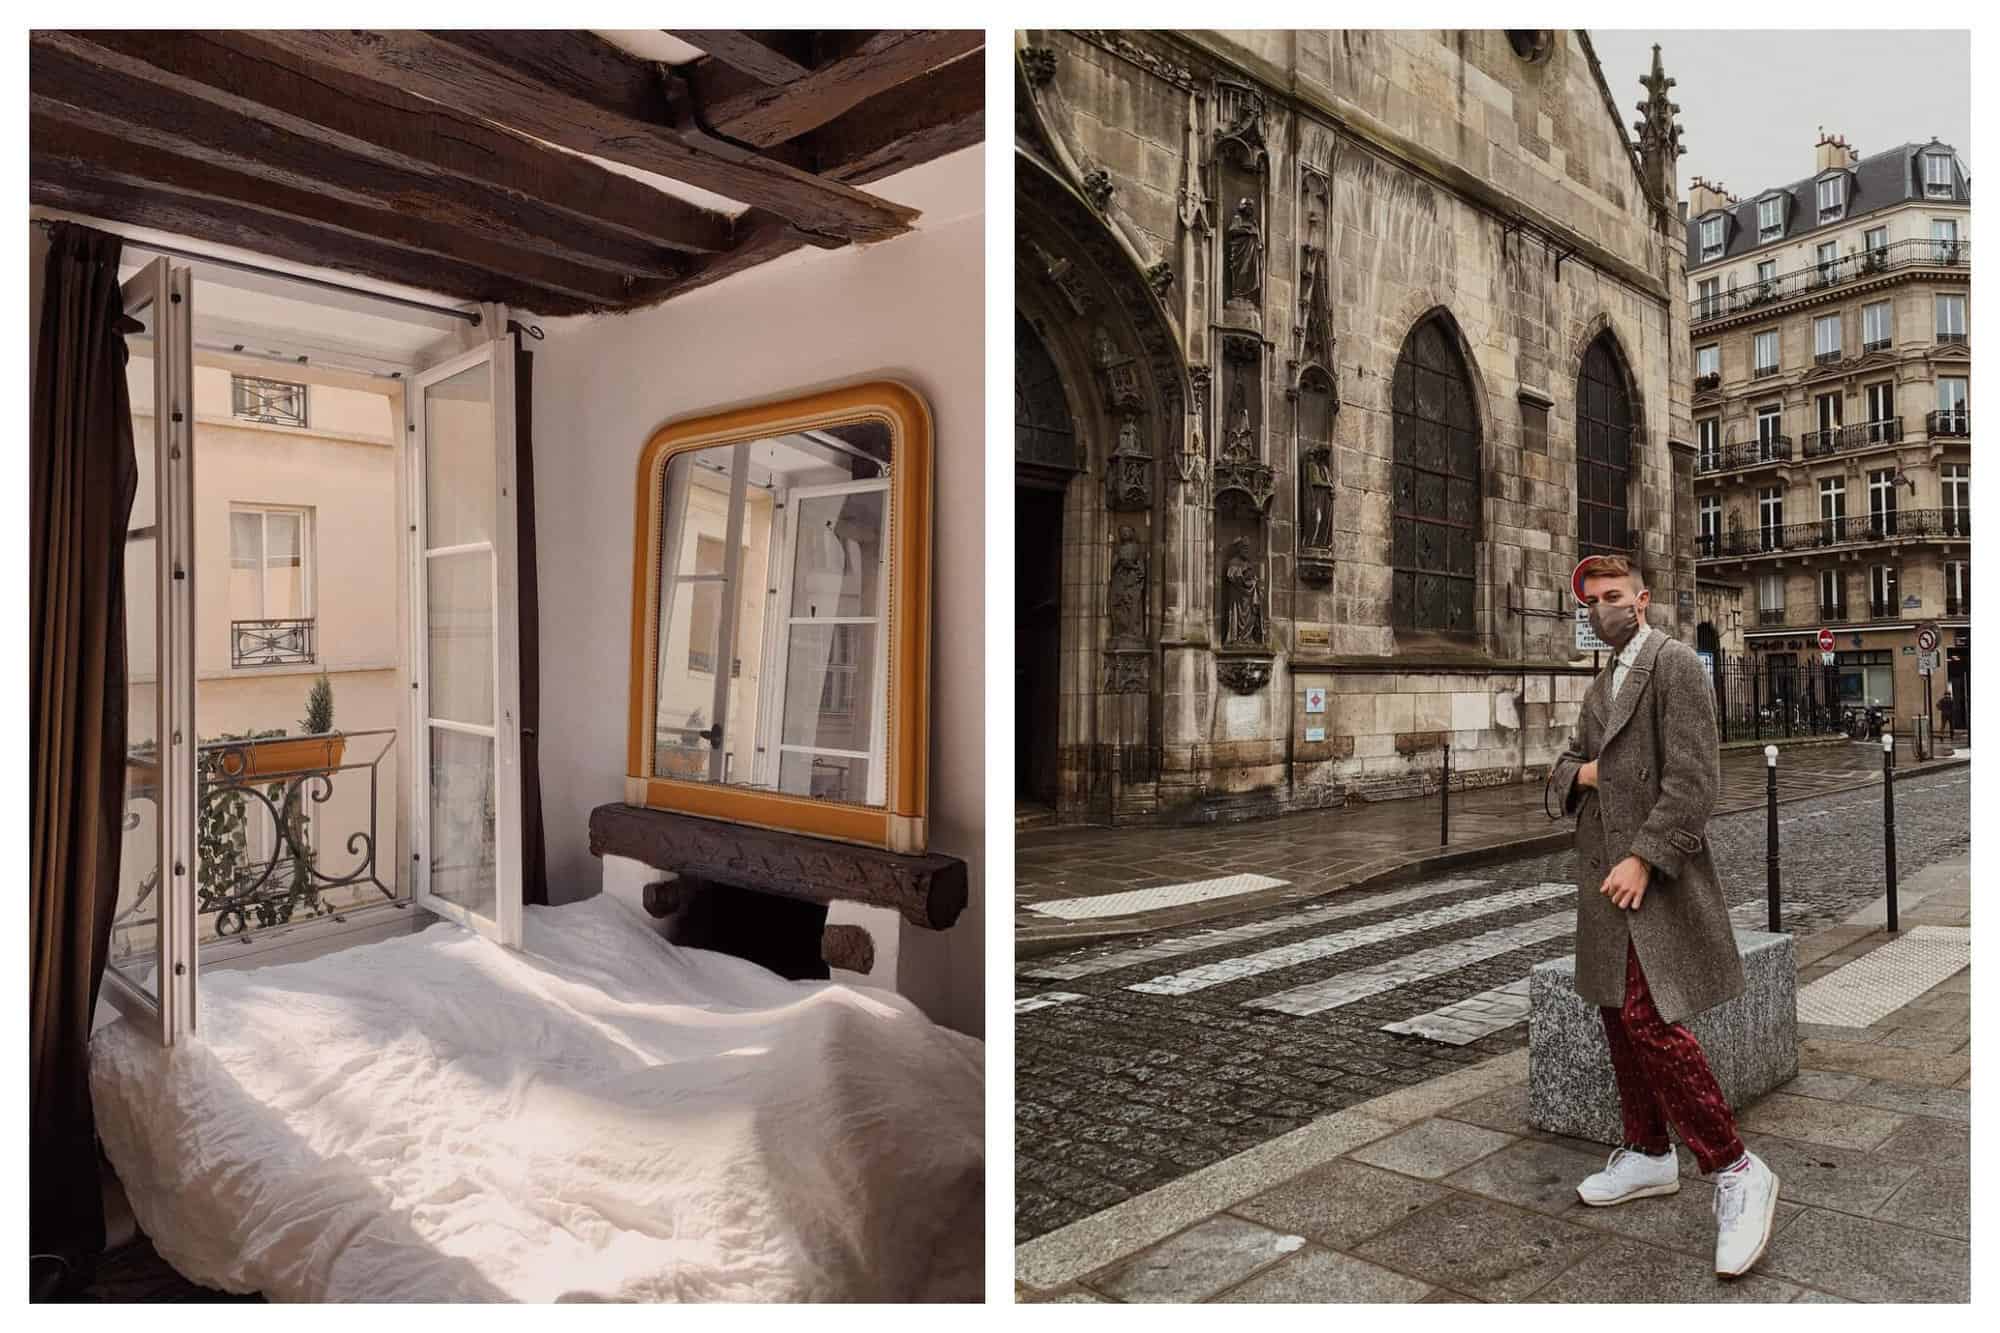 Left: A bedroom in Paris. The bed is pushed up against a wall and window, with the windows open. Right: A man stands on a street in Paris, wearing a face mask. 